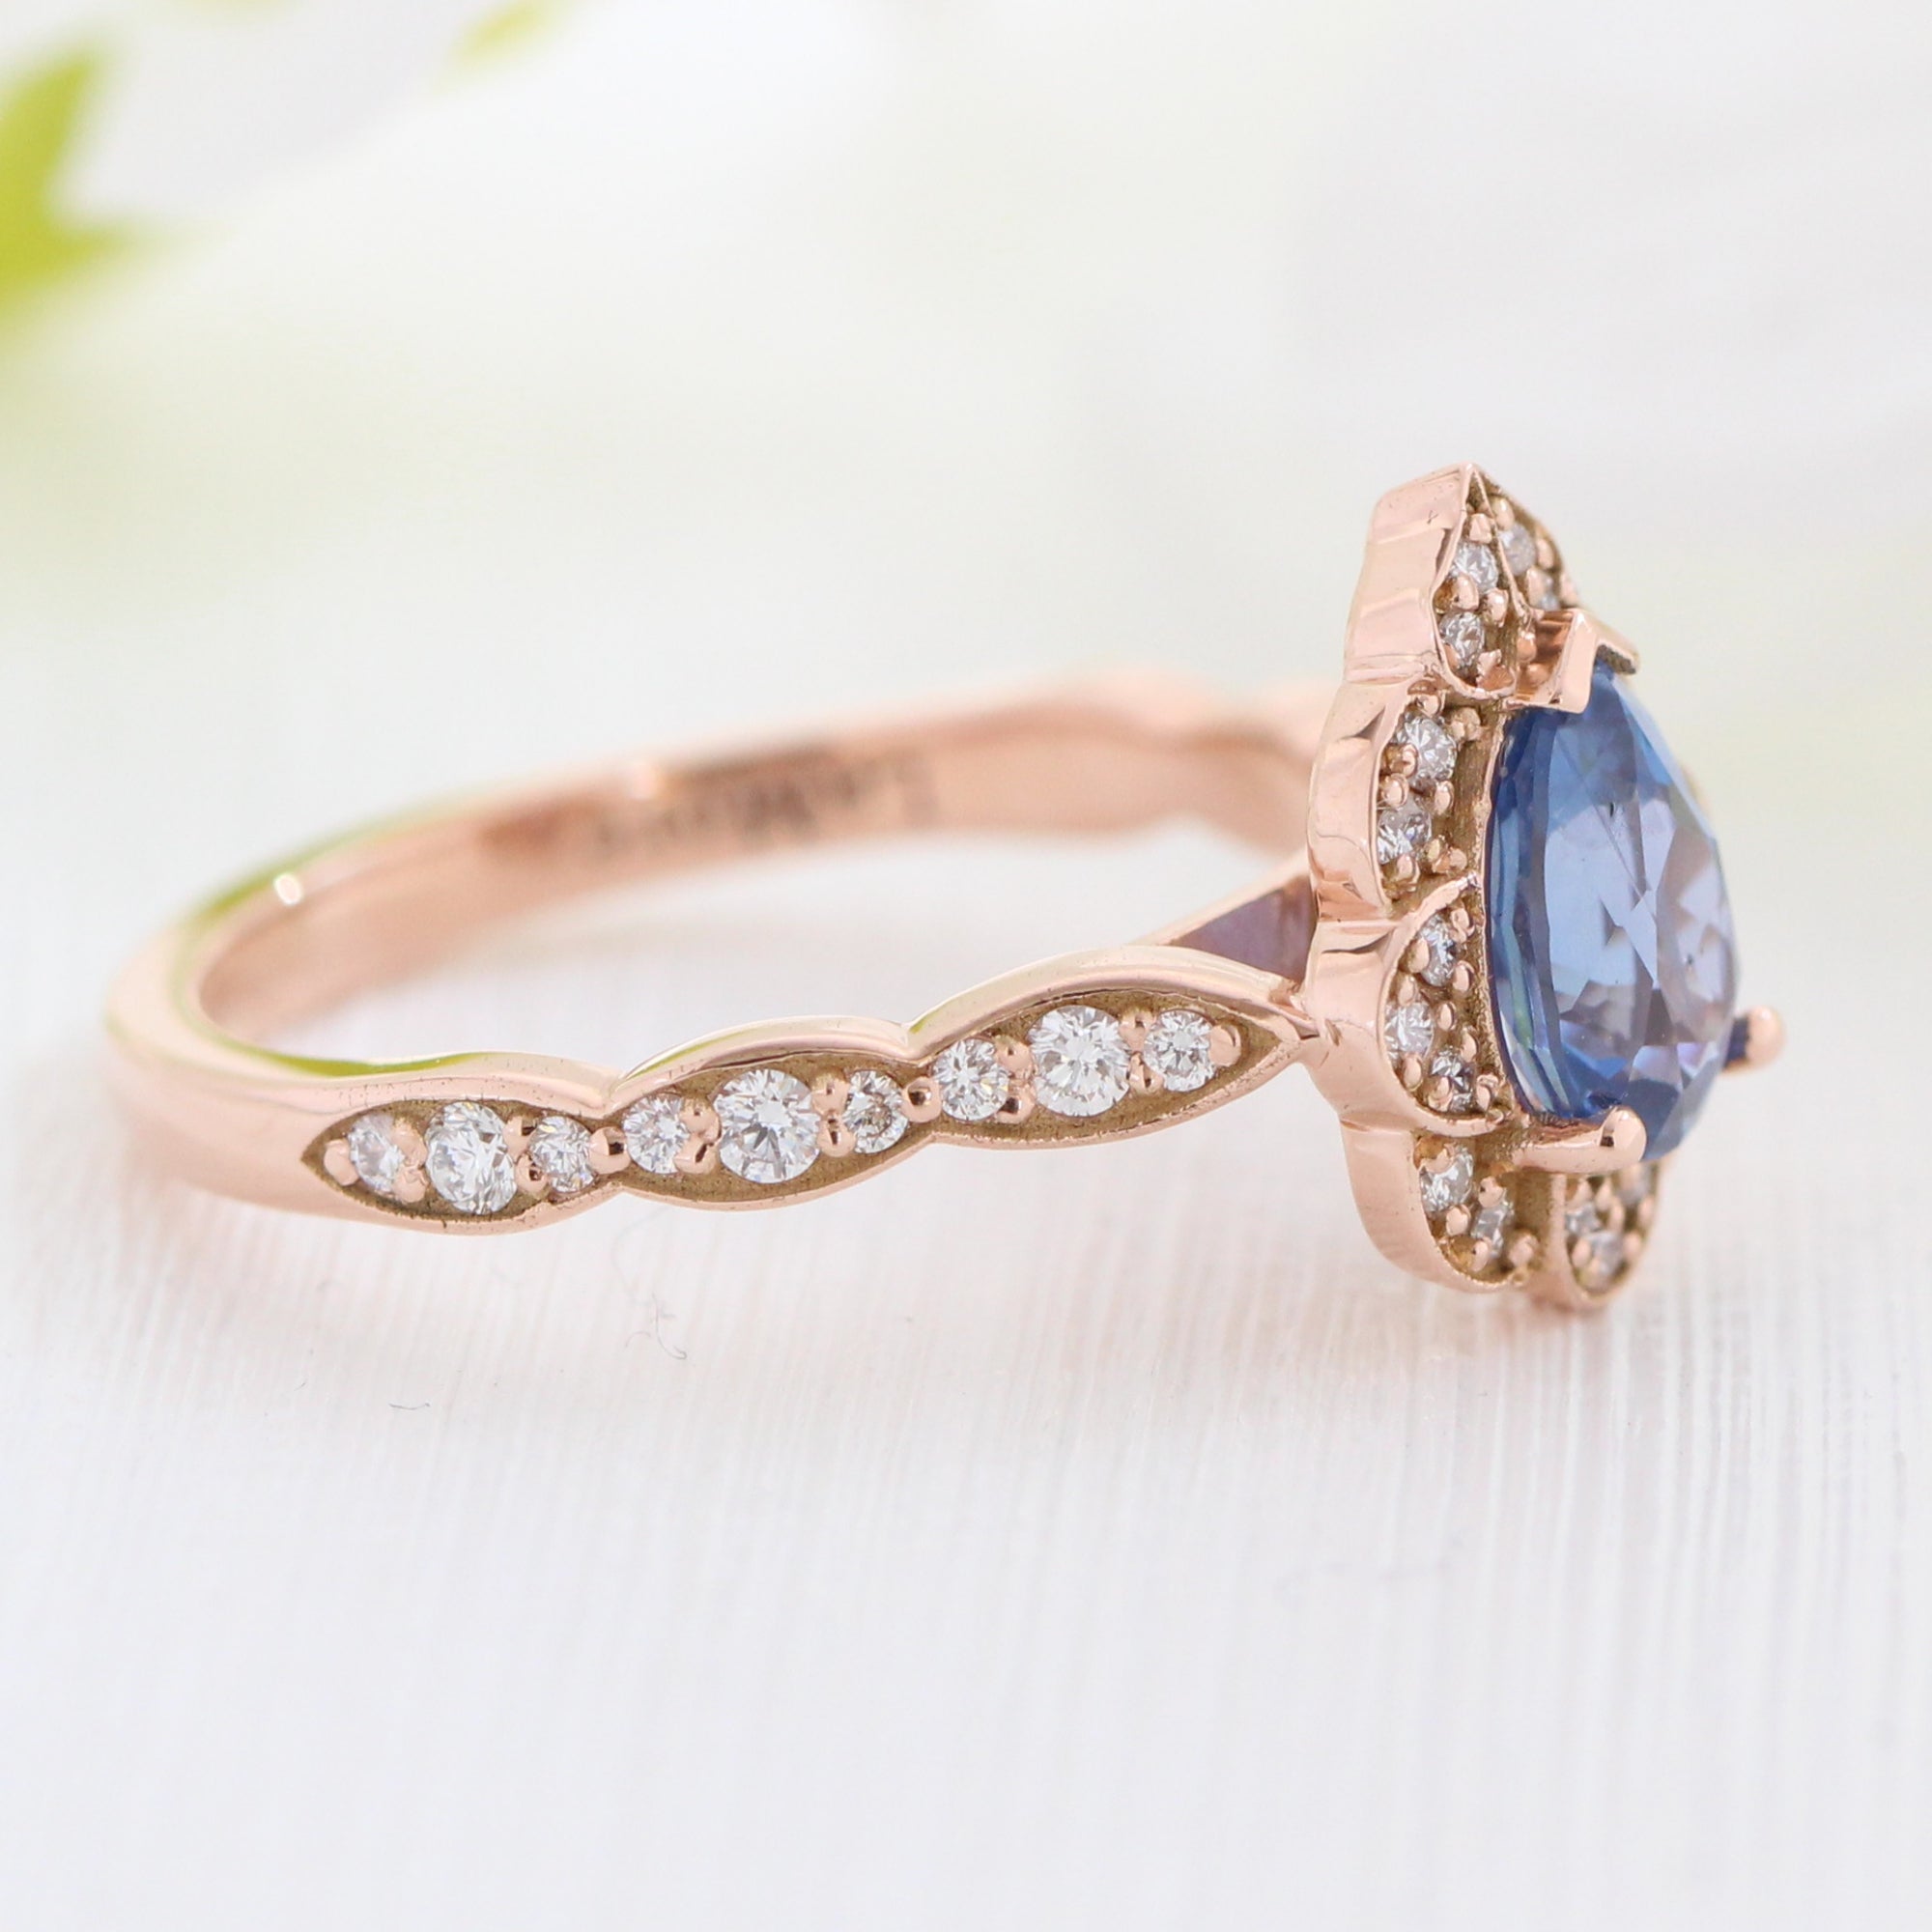 Ceylon sapphire ring rose gold pear engagement ring la more design jewelry